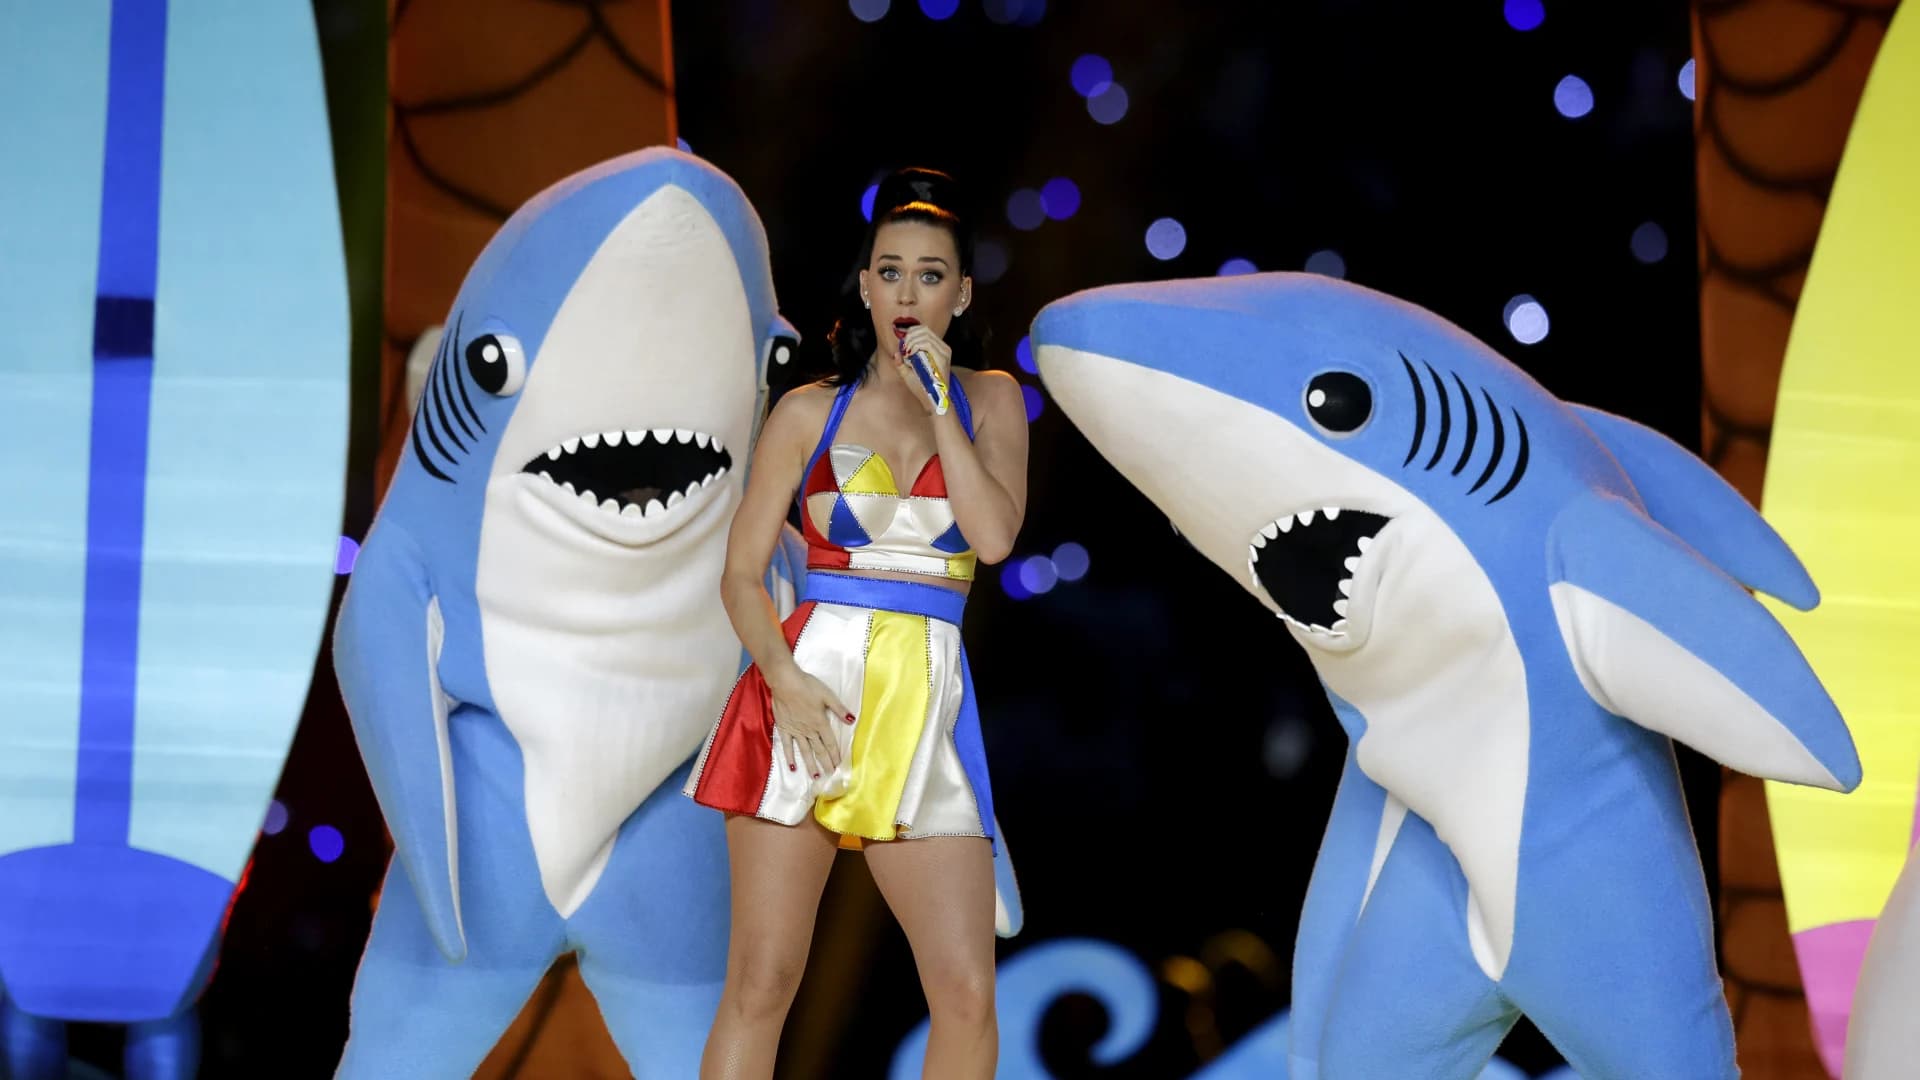 Guide: A look at the Super Bowl Halftime Show so far this century